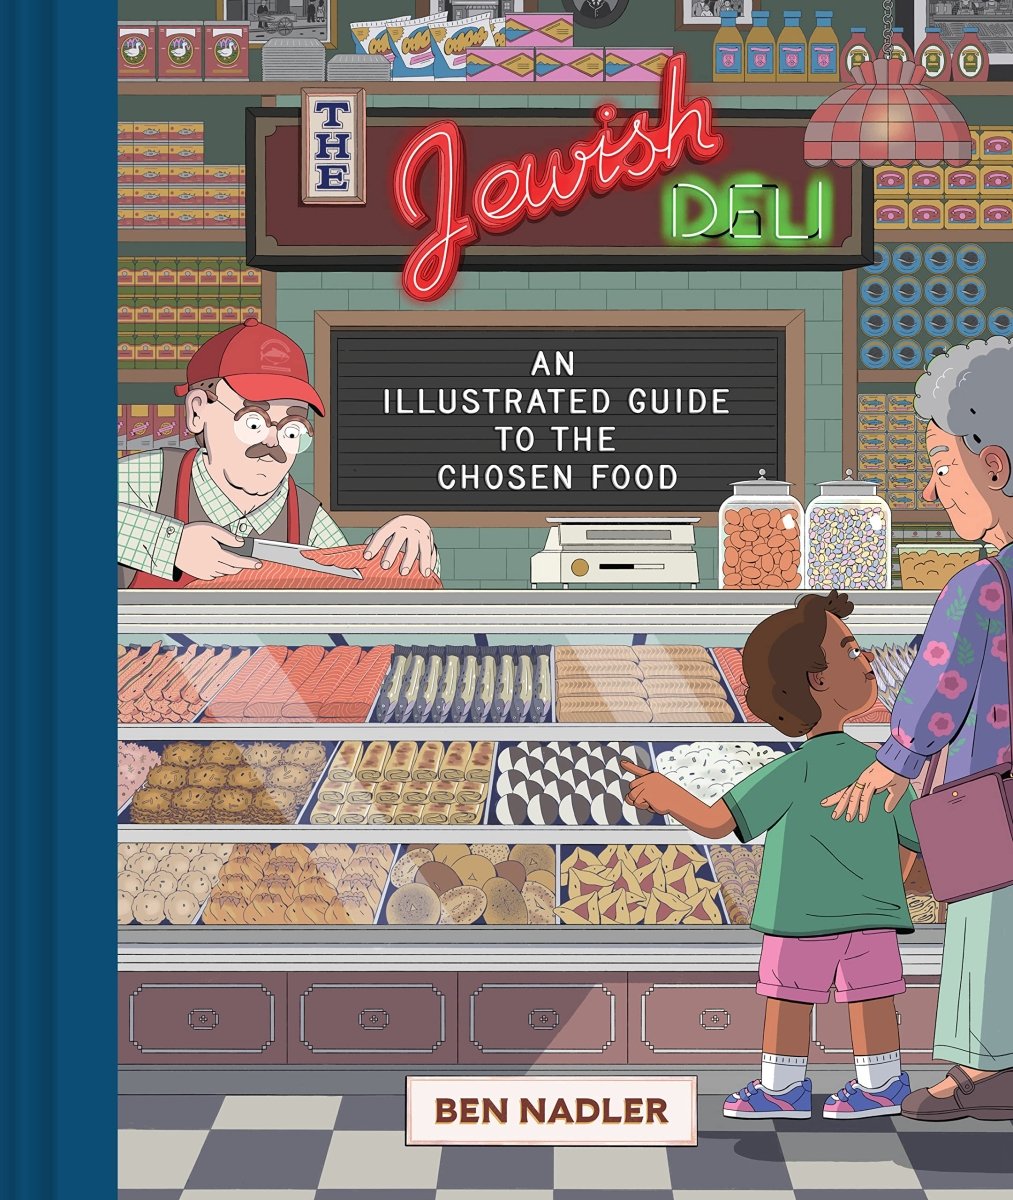 Jewish Deli Illustrated Guide To The Chosen Food GN HC - Walt's Comic Shop